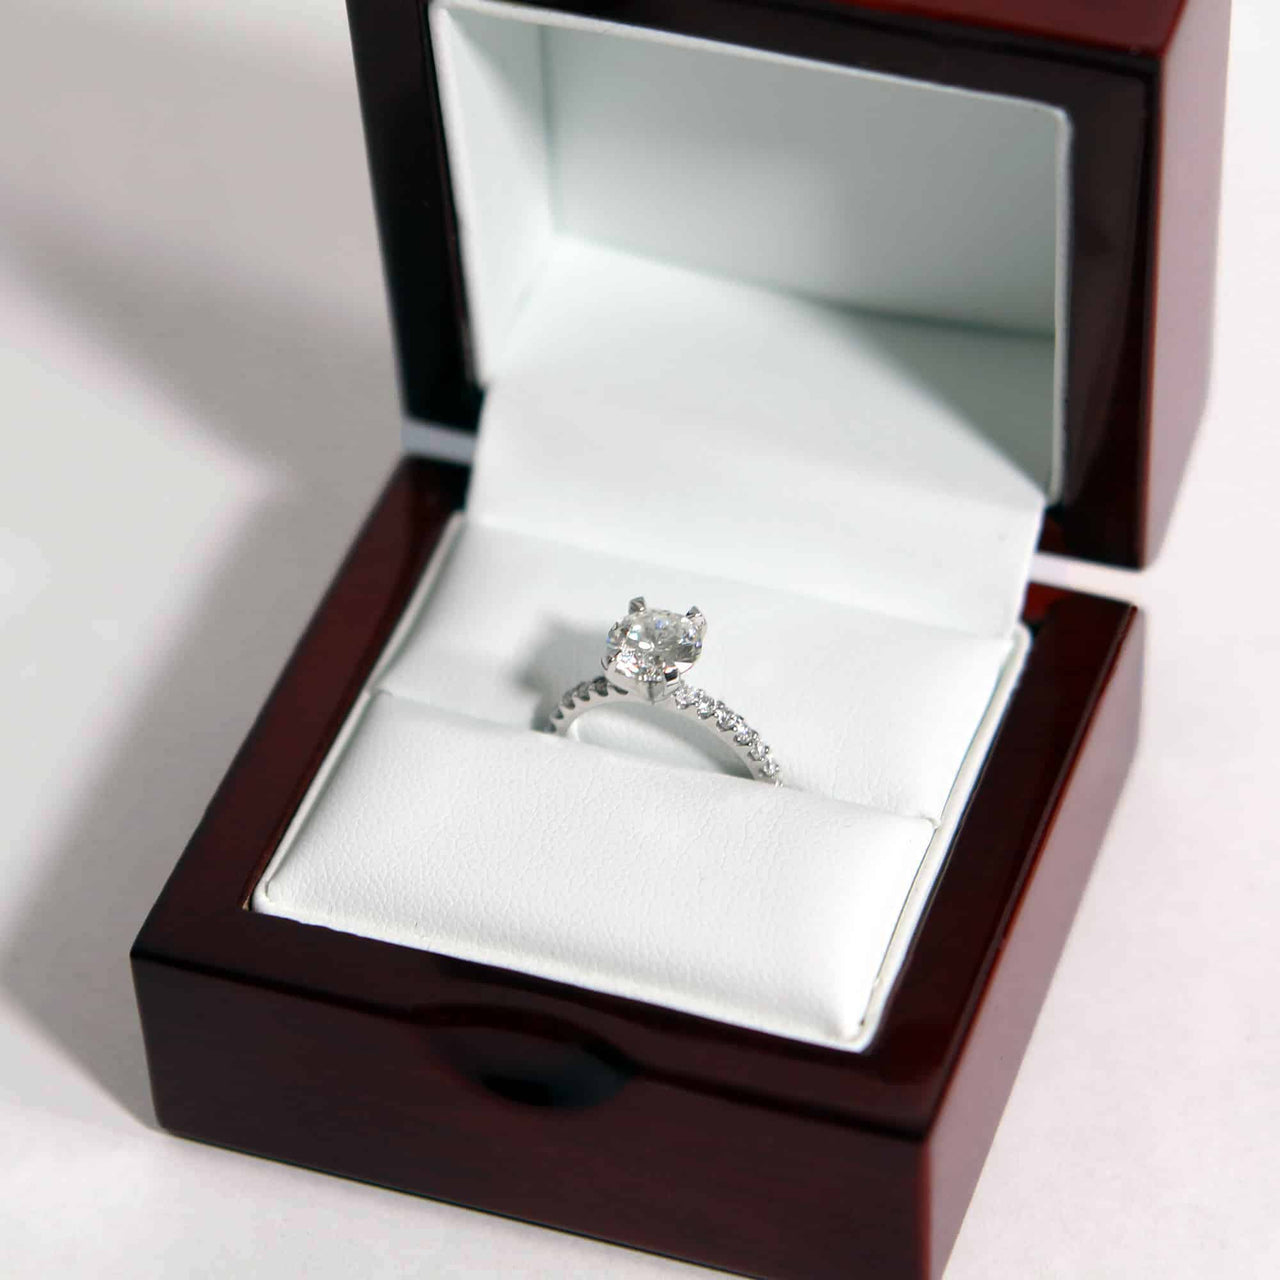 Proposal Ring Box For Engagement Ring